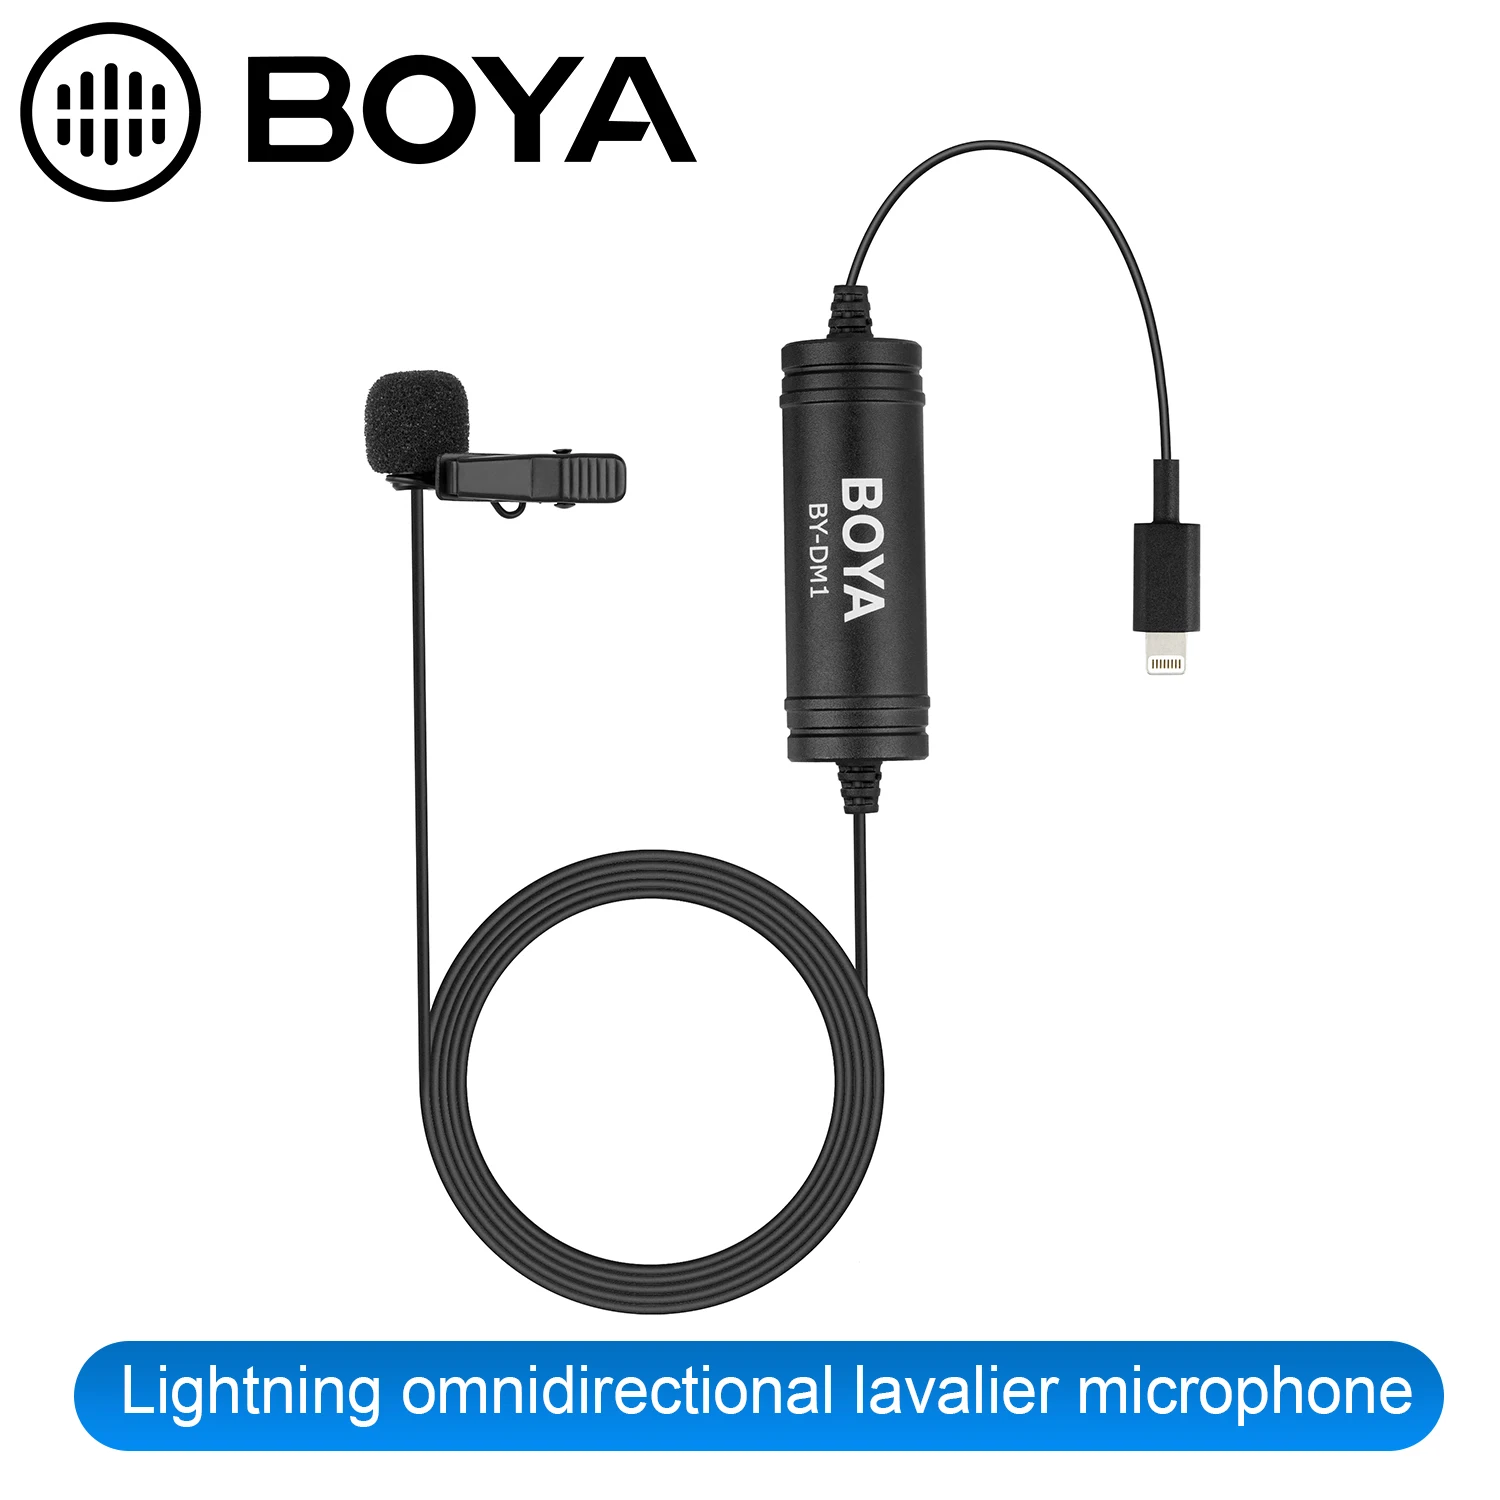 

BOYA BY-DM1 Lavalier Microphone for iOS iPhone Xs Xr 8 7 SE 6S iPad Pro Air mini 2 iPOD TOUCH MFi Certified Lightning Connector